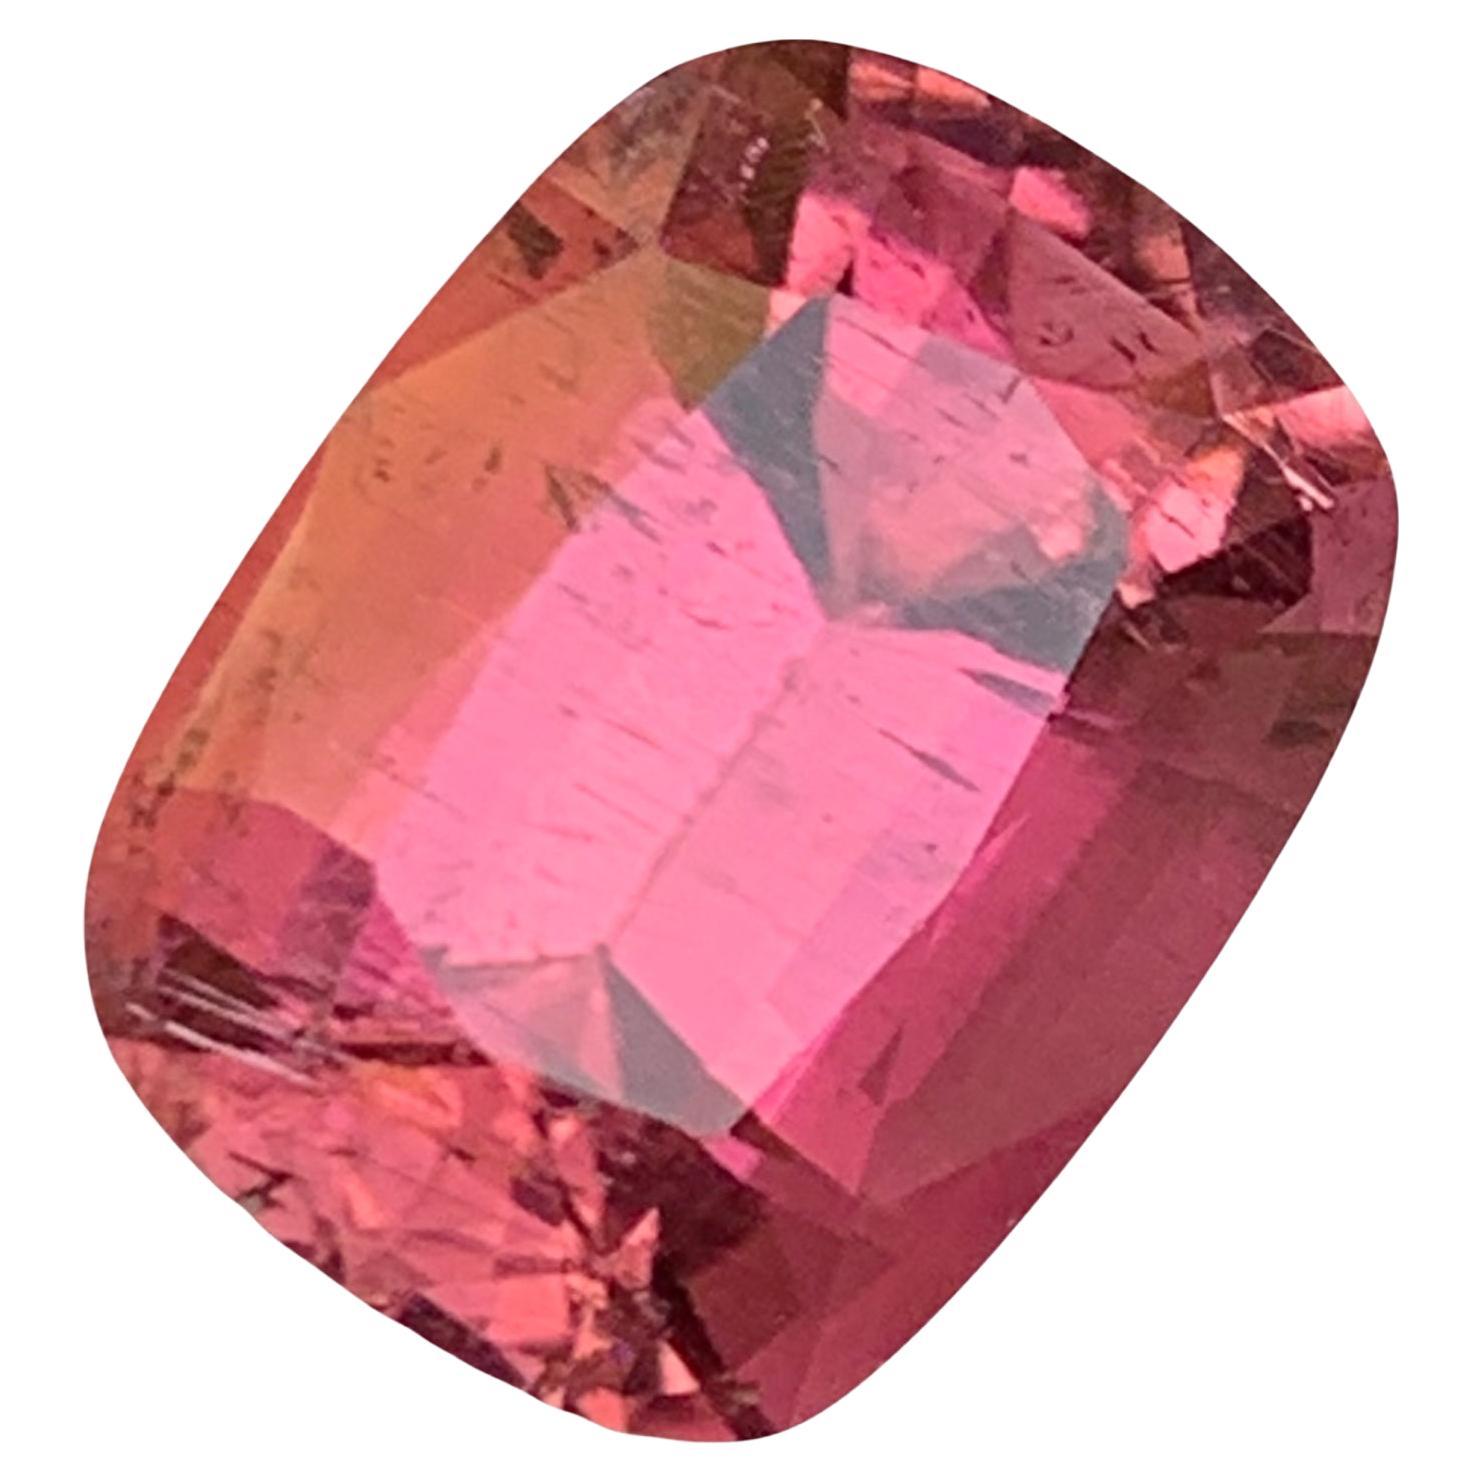 Rare Pink Natural Tourmaline Gemstone, 14.5 Ct Cushion Cut for Ring or Pendant For Sale